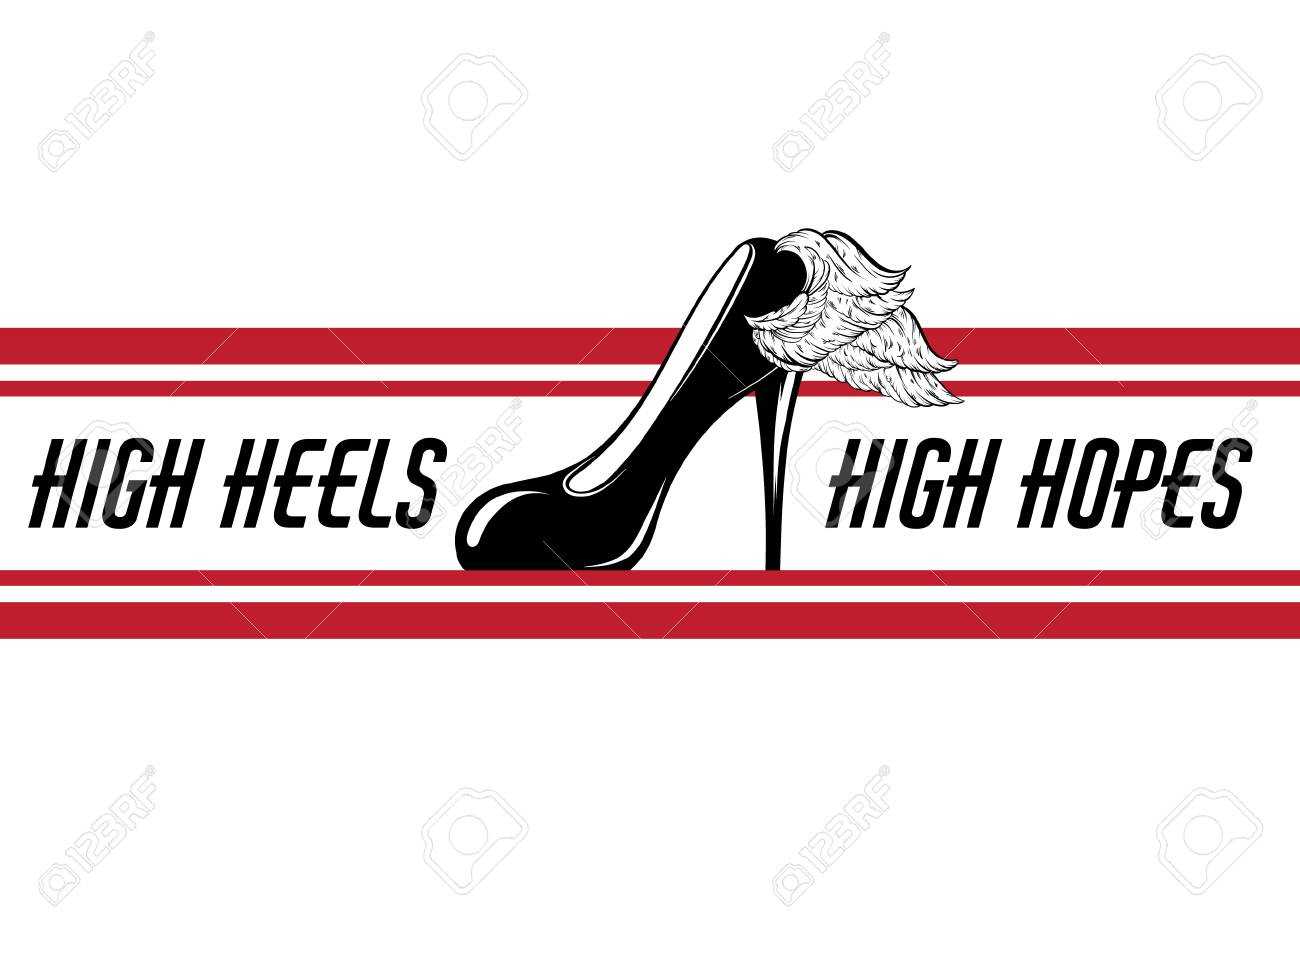 High Heels, High Hopes. Vector Hand Drawn Illustration Of Shoe.. Intended For High Heel Shoe Template For Card